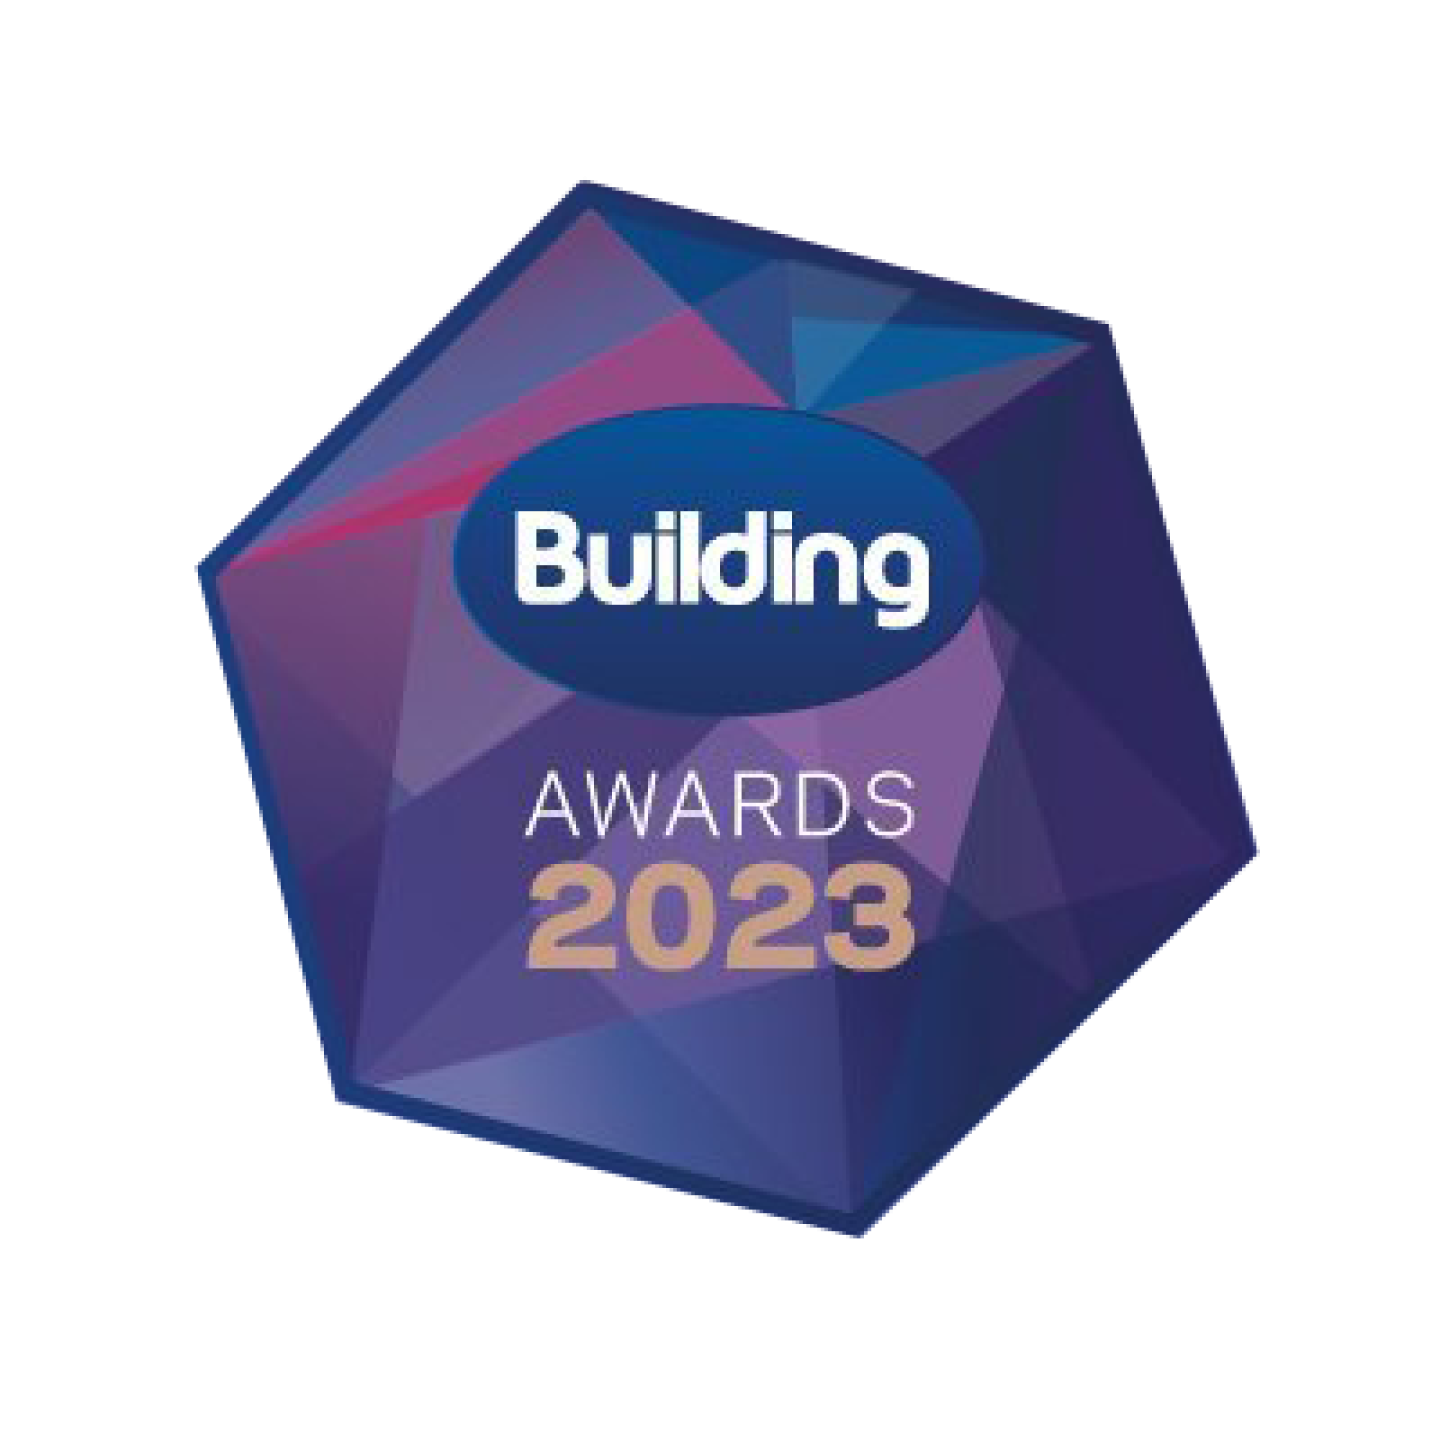 Siderise Building Awards Manufacturer of the year 2023 award